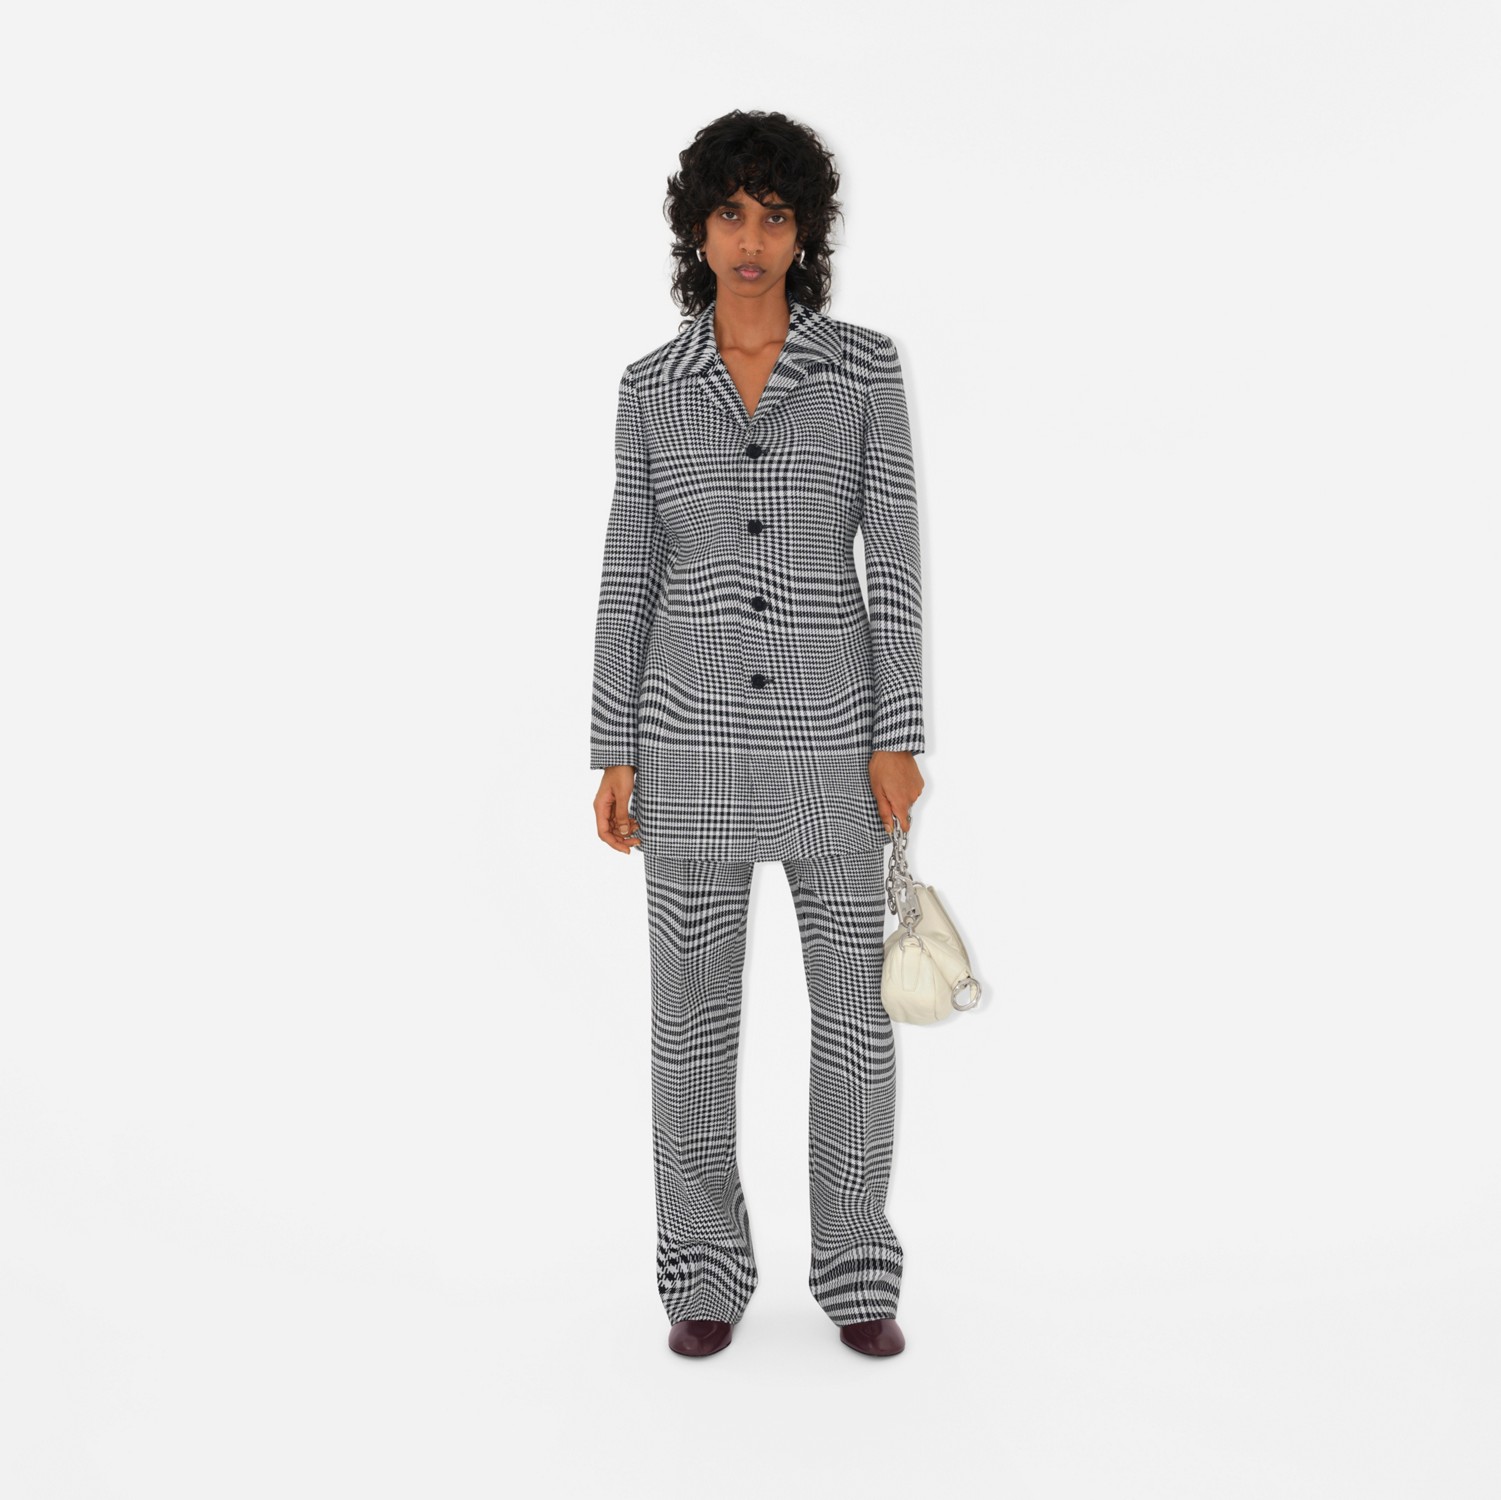 Warped Houndstooth Wool Trousers